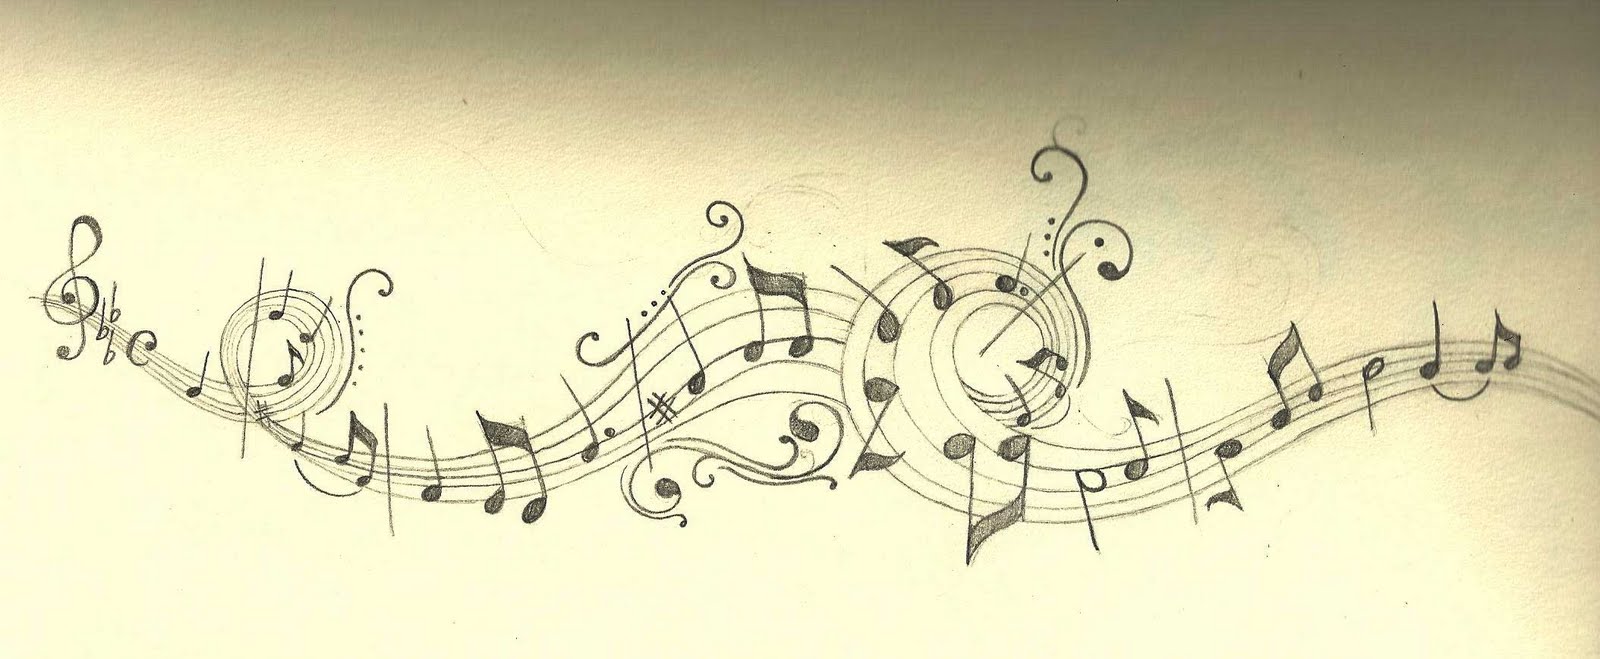 15 Easy Music Notes Drawing Ideas  How to Draw